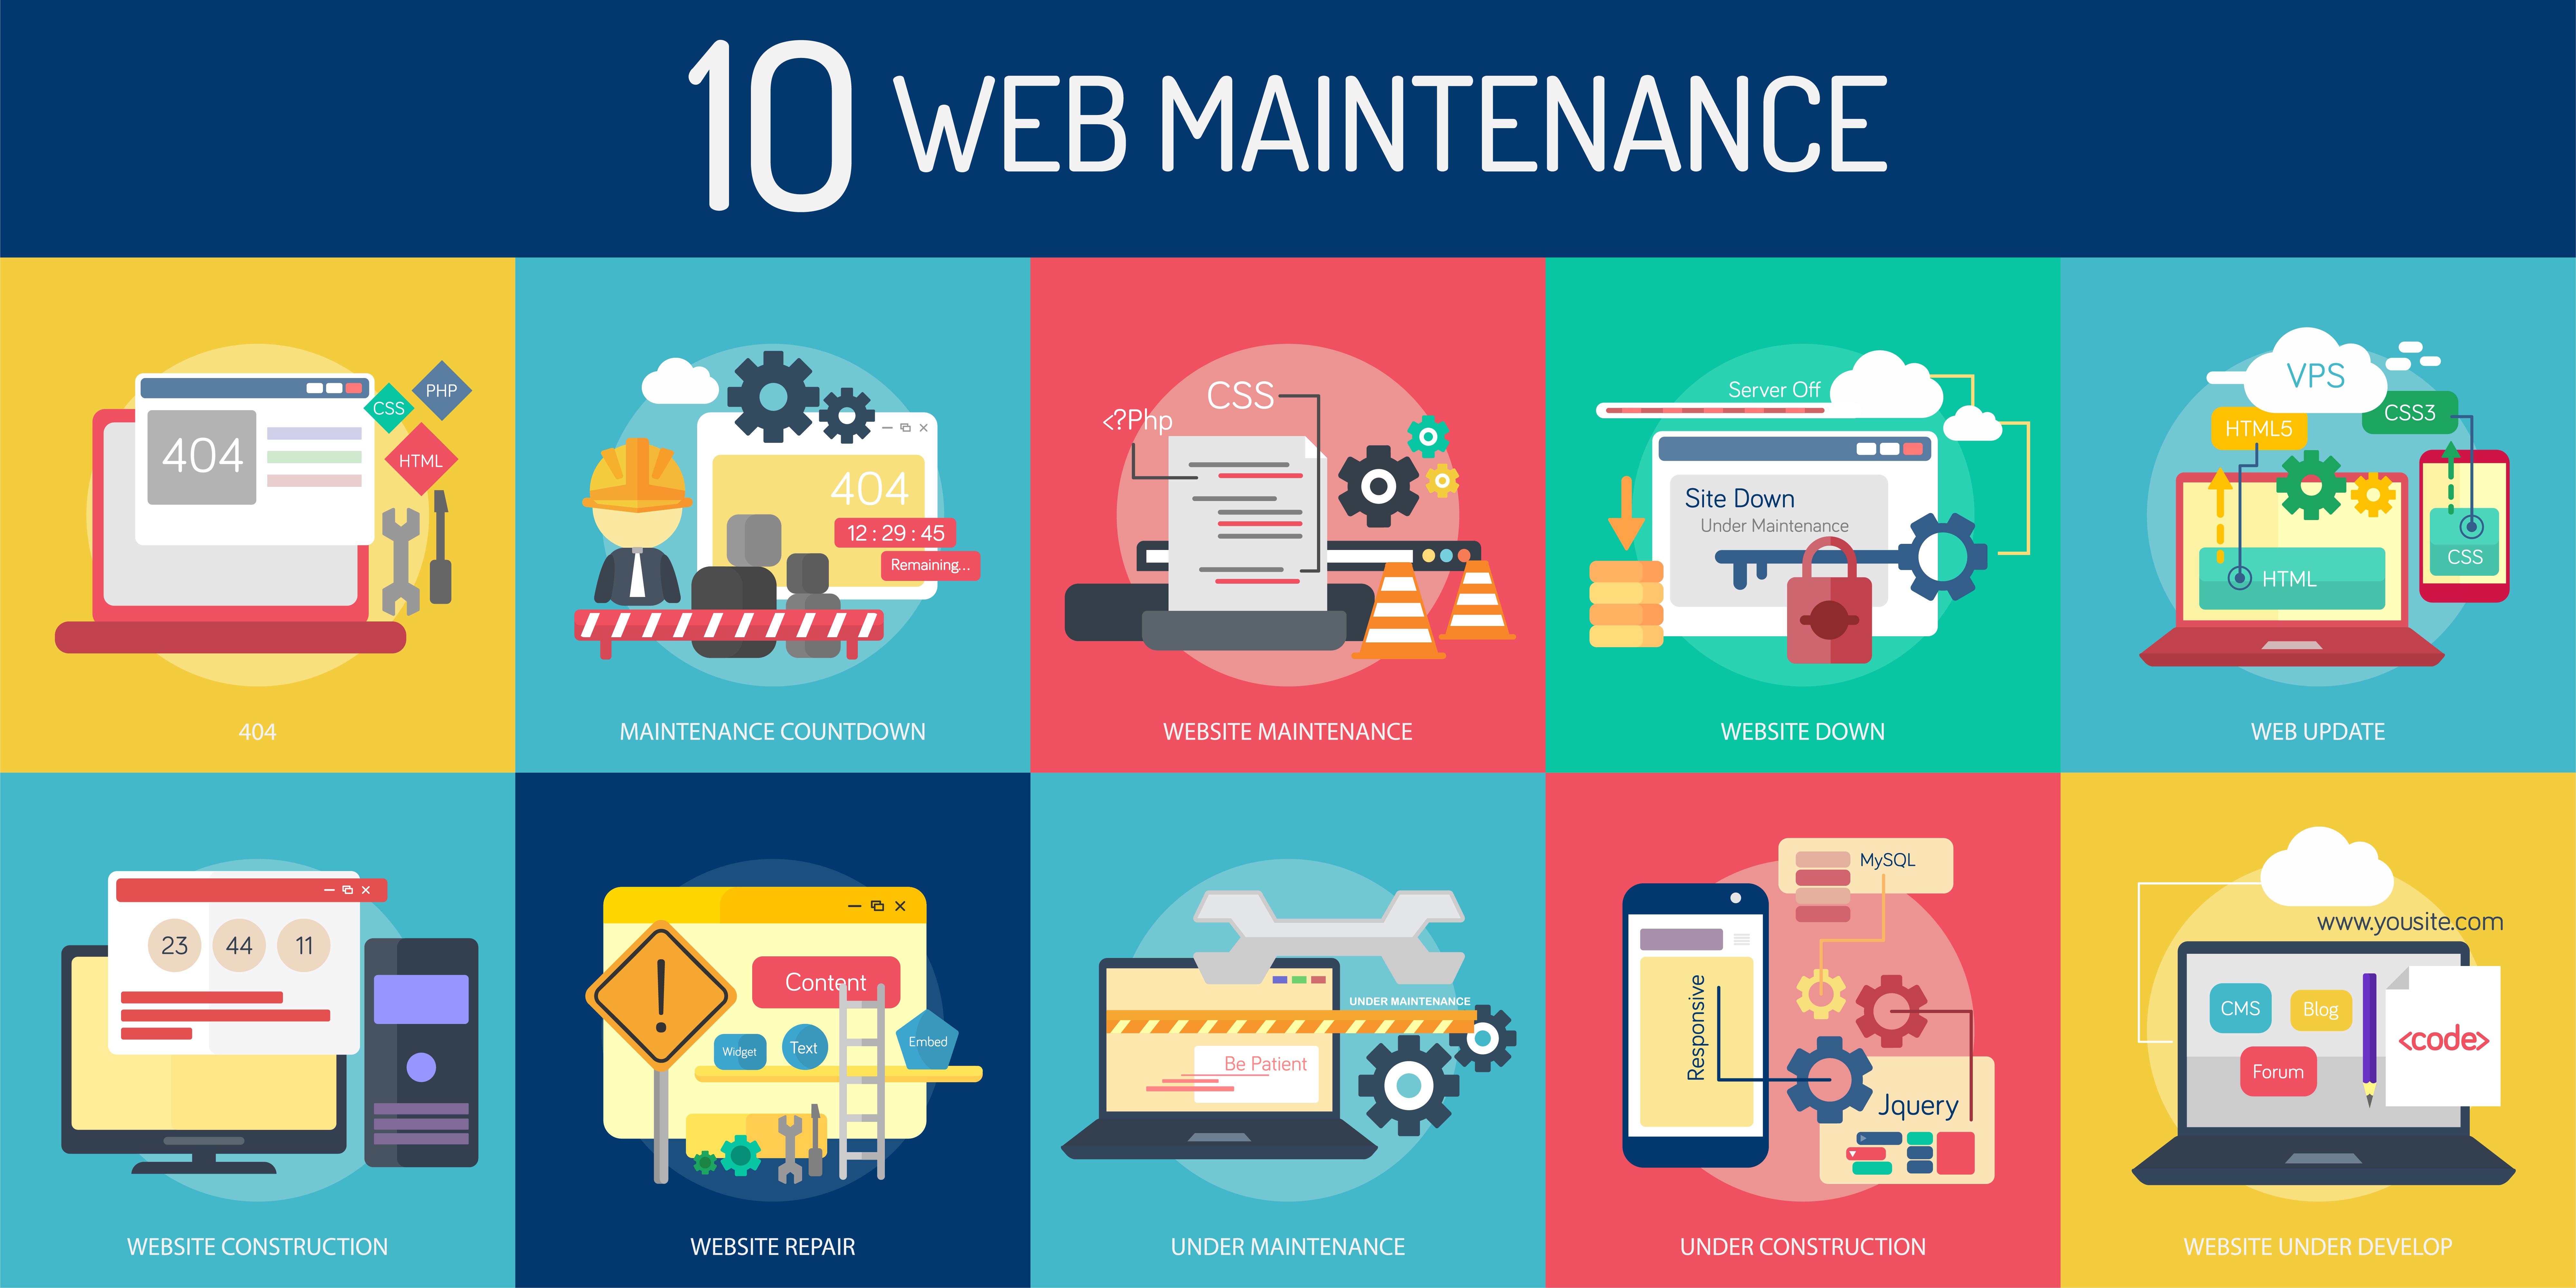 How Much Does WordPress Website Maintenance Cost?